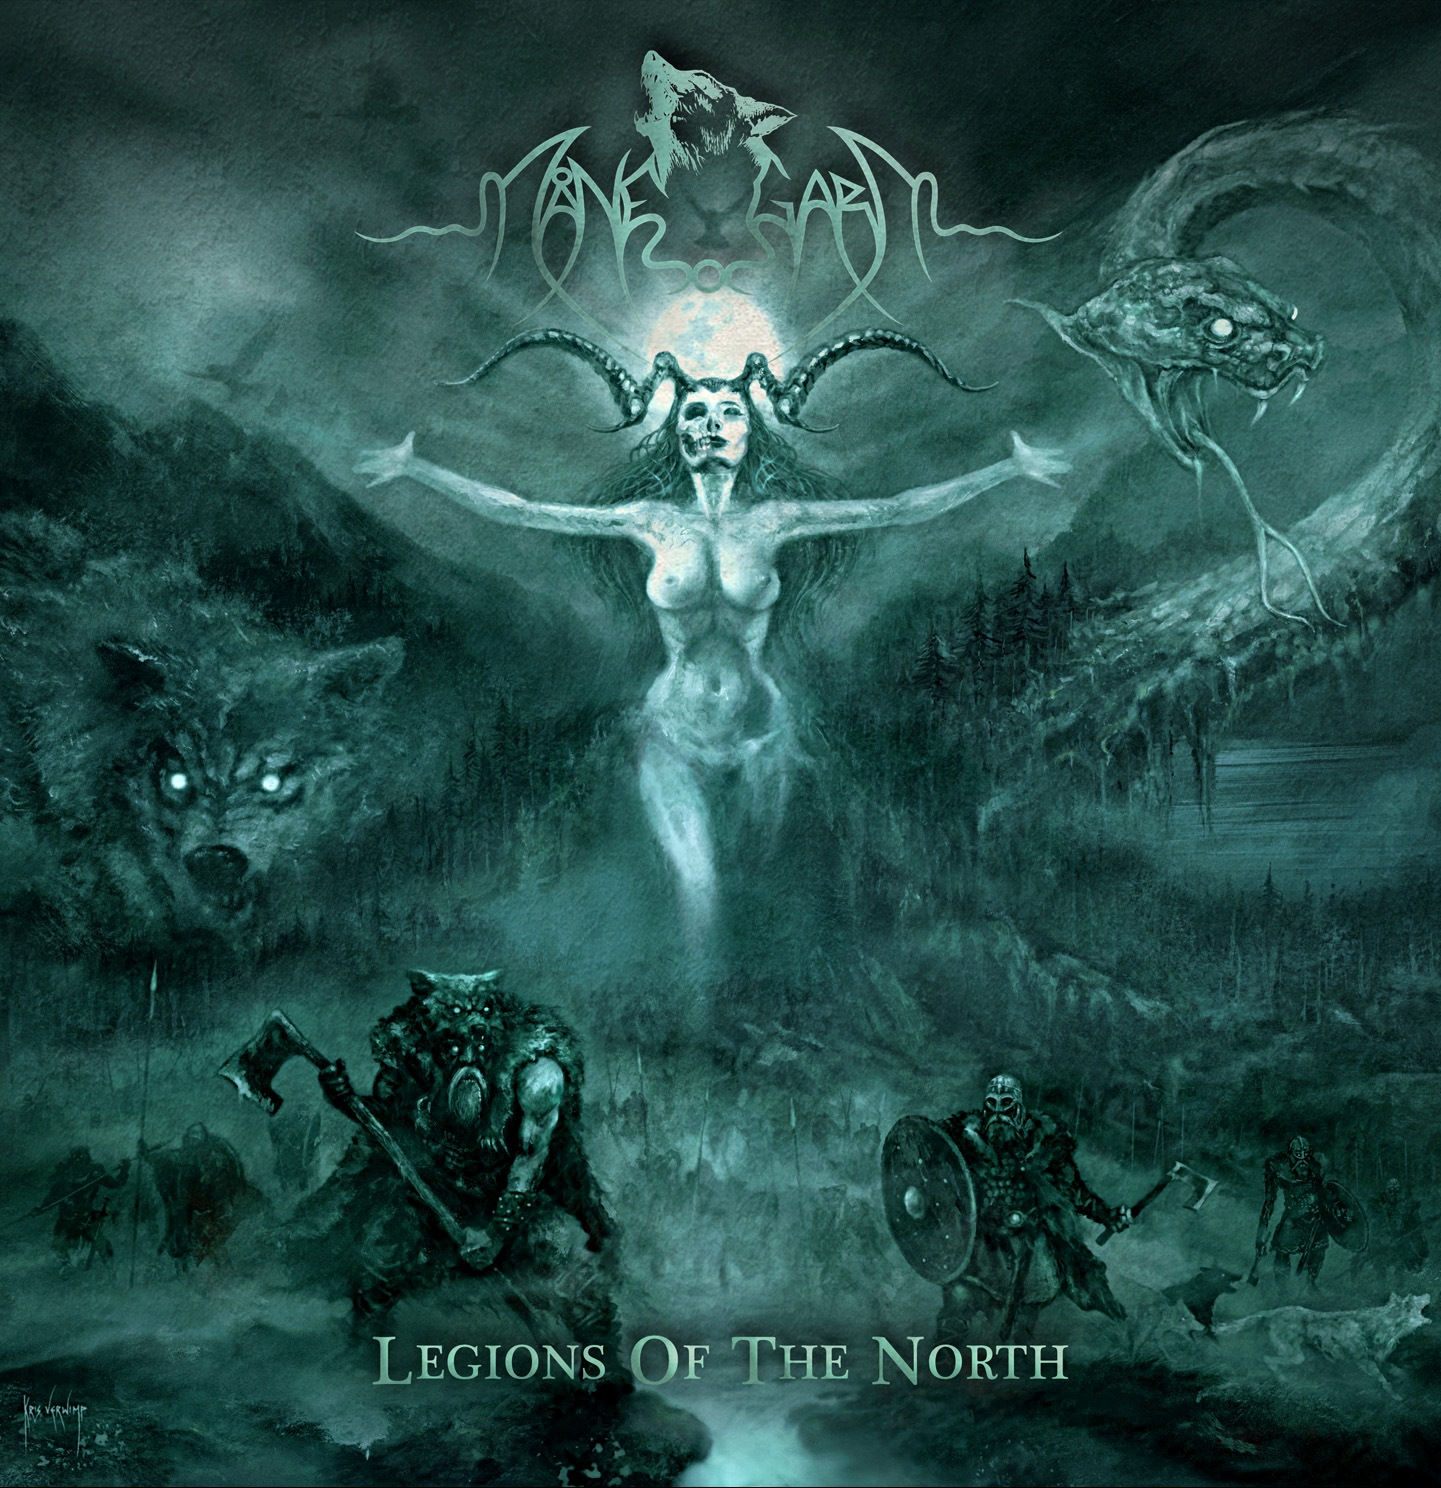 Månegarm – Legions of the North Review